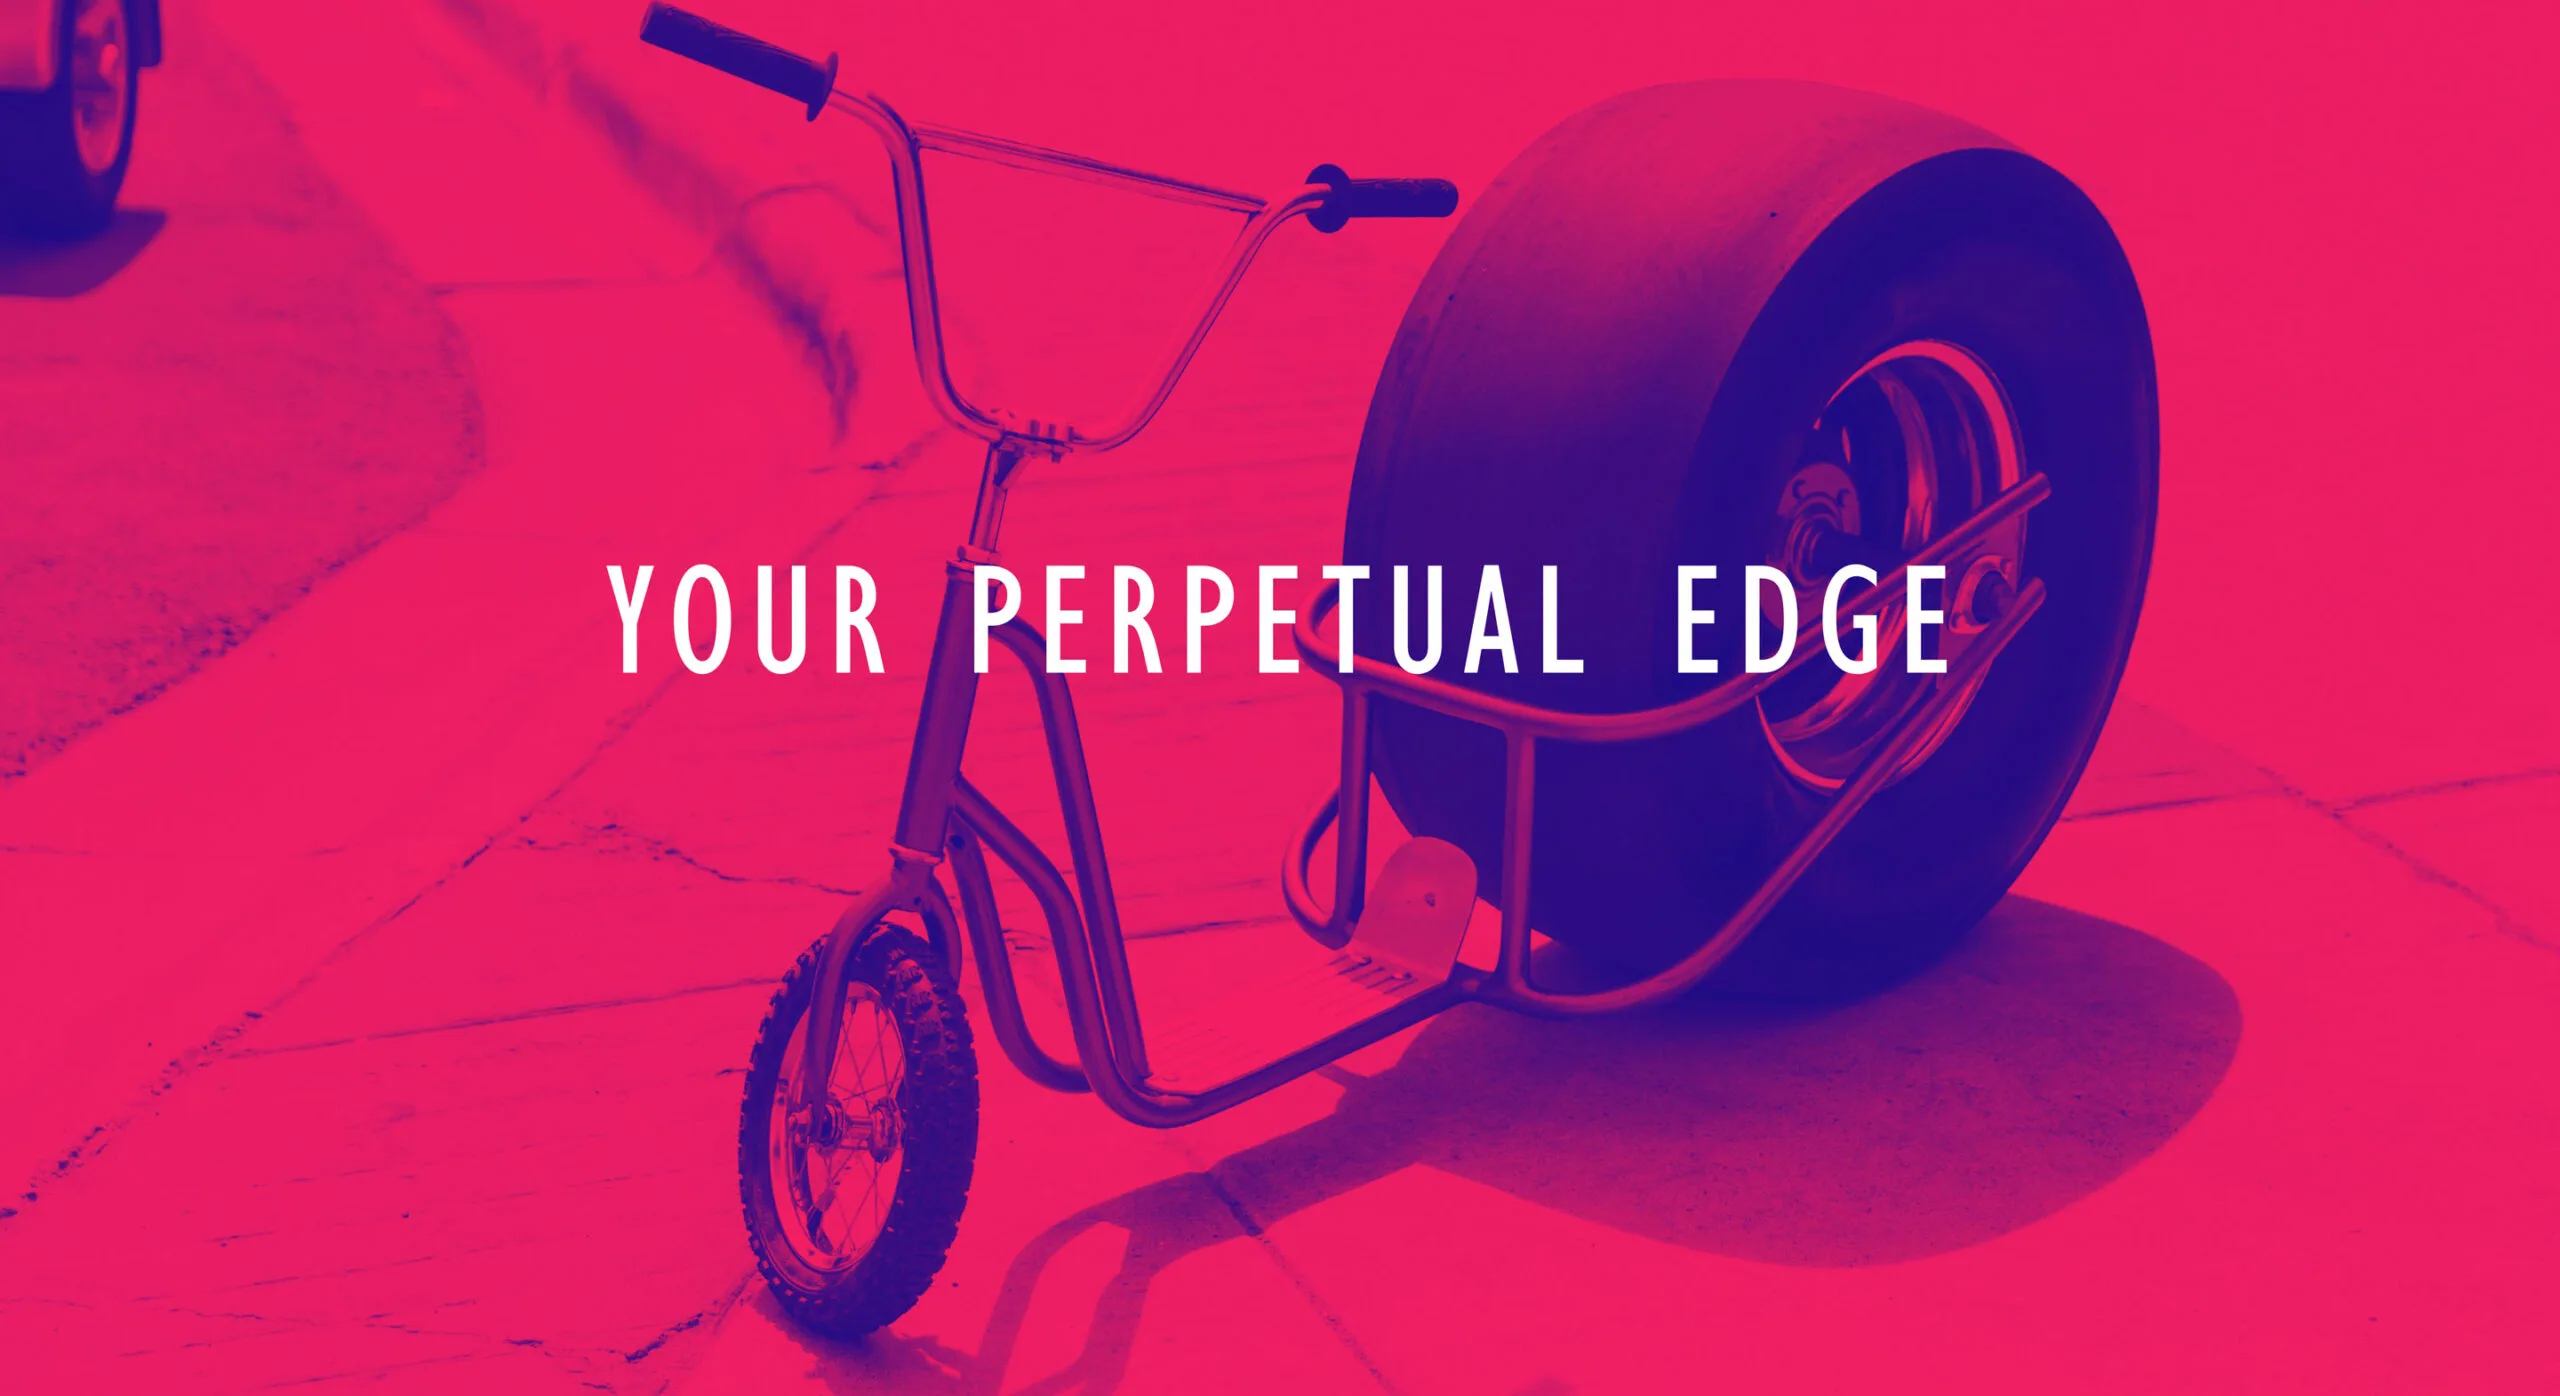 your perpetual edge text overlay